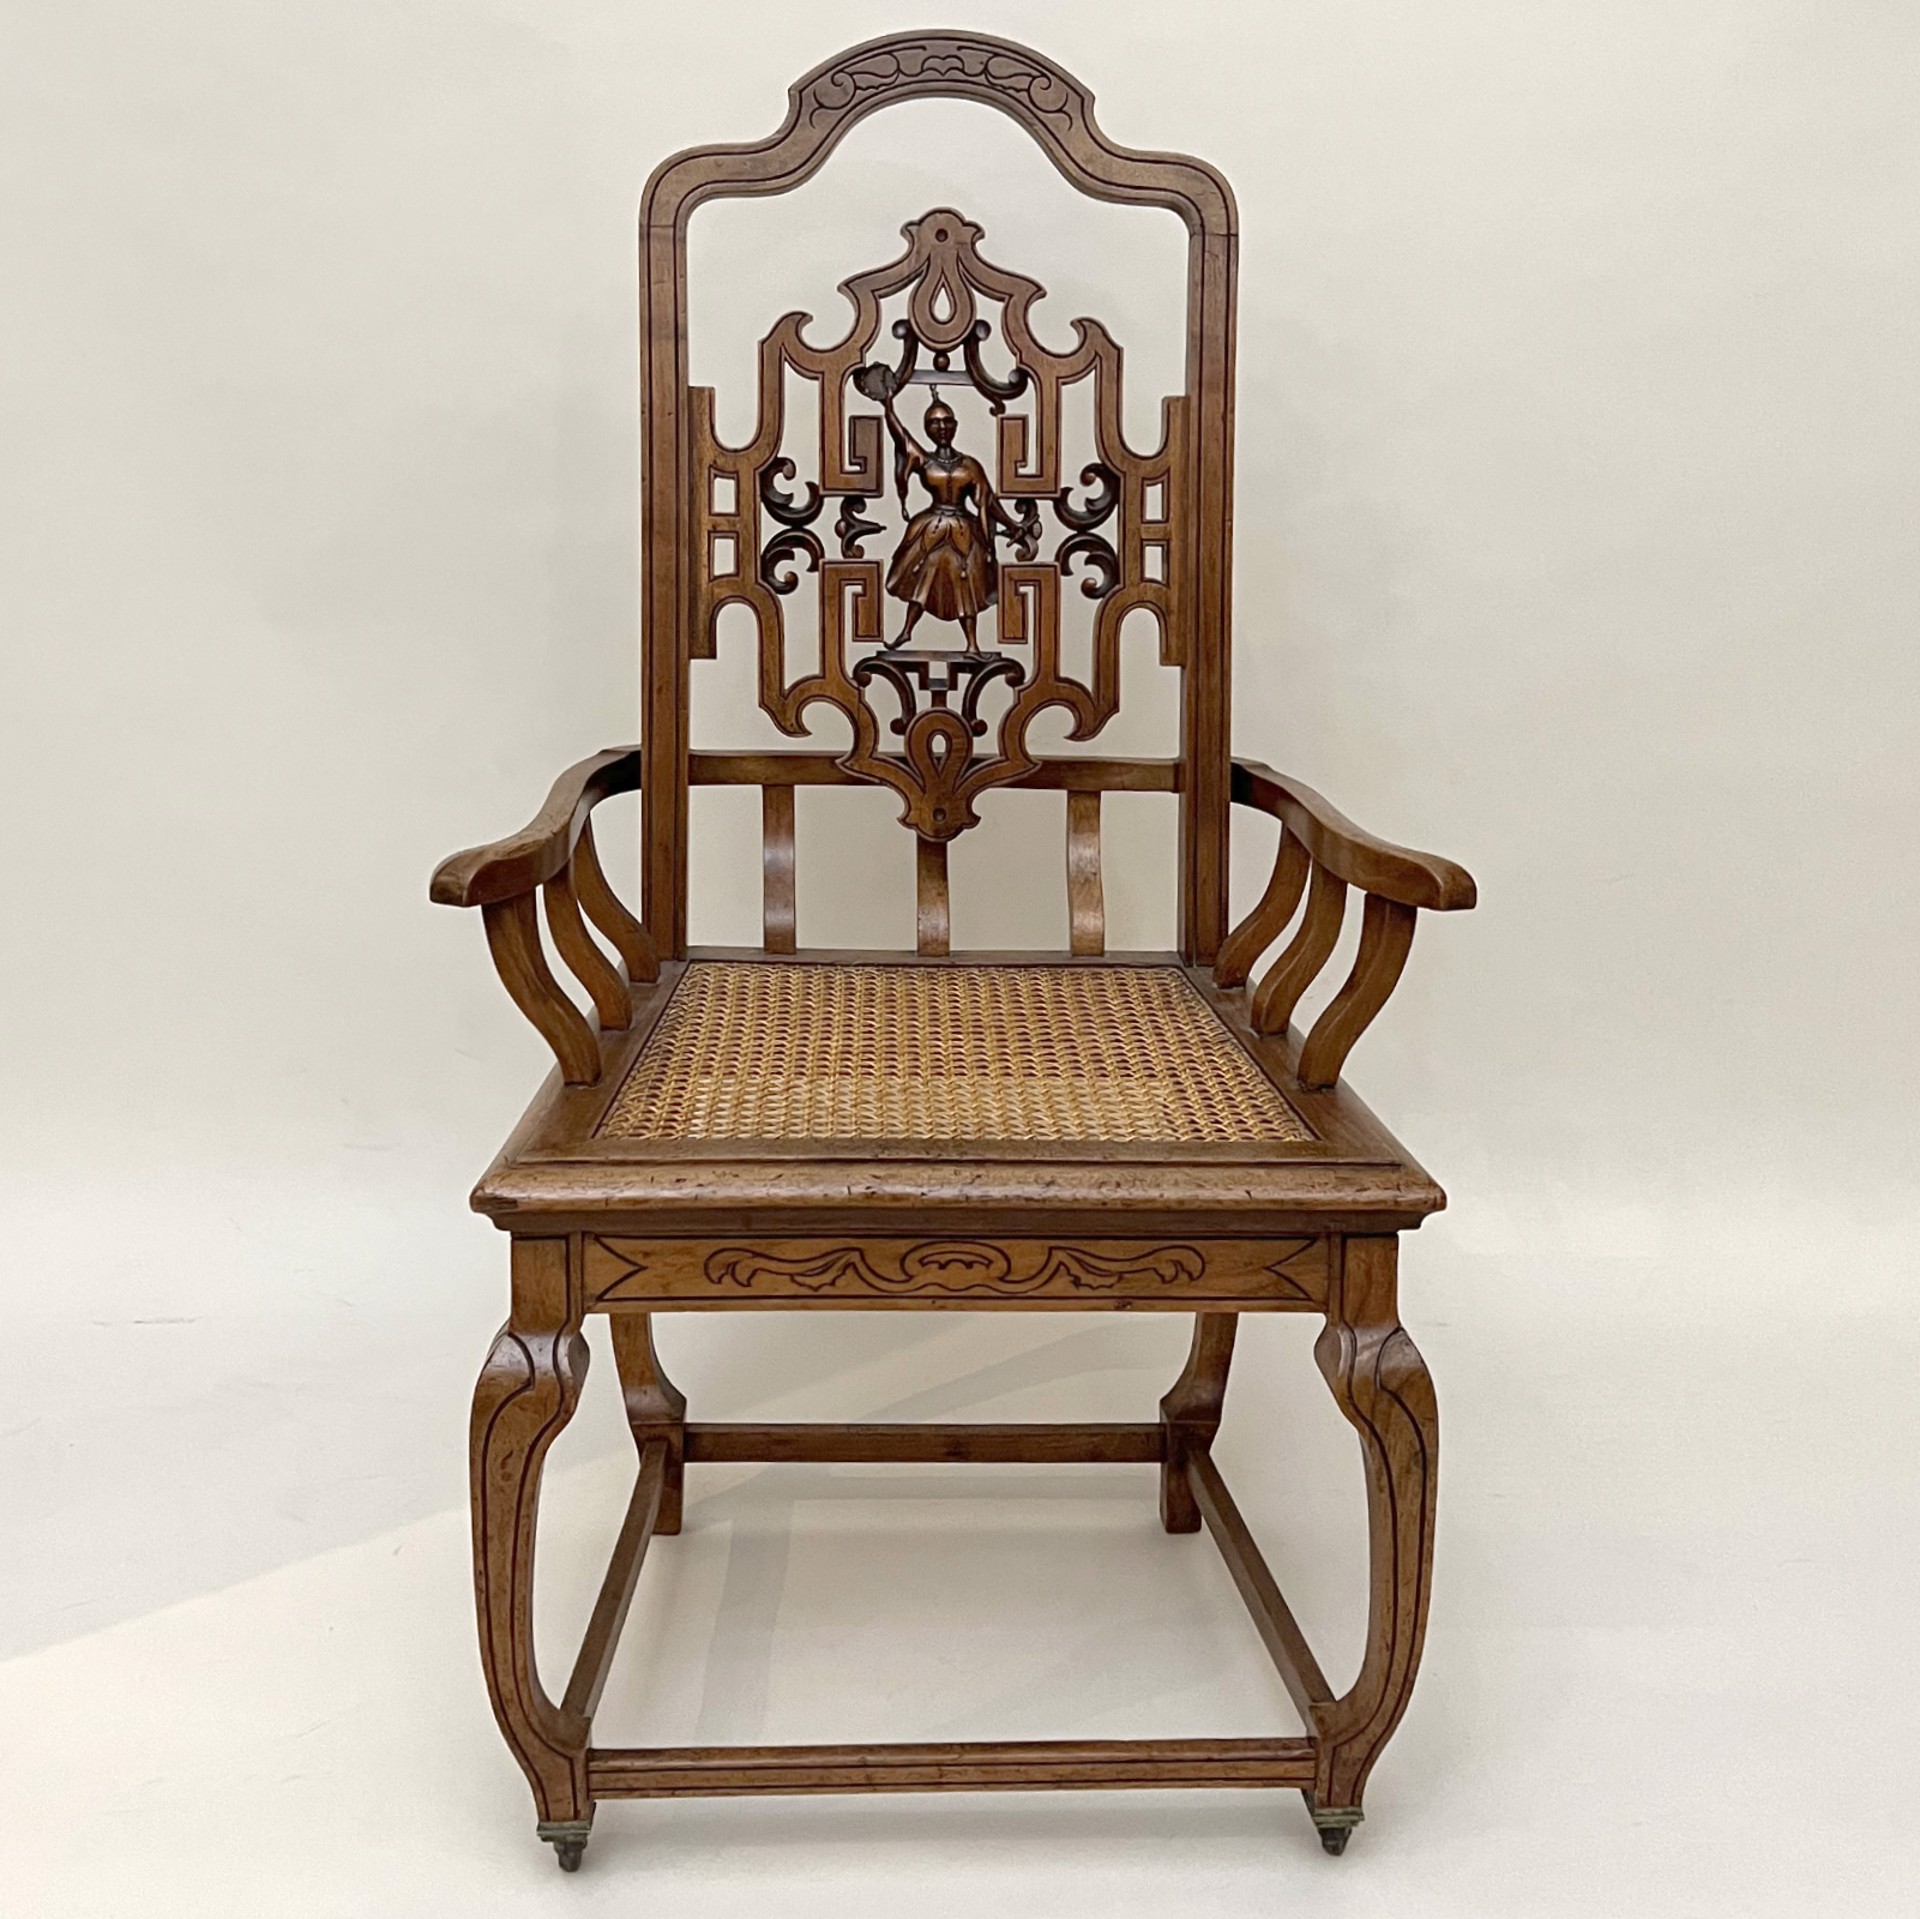 CHINESE EXPORT CANED SEAT ARMCHAIR OF CHINOISERIE STYLE